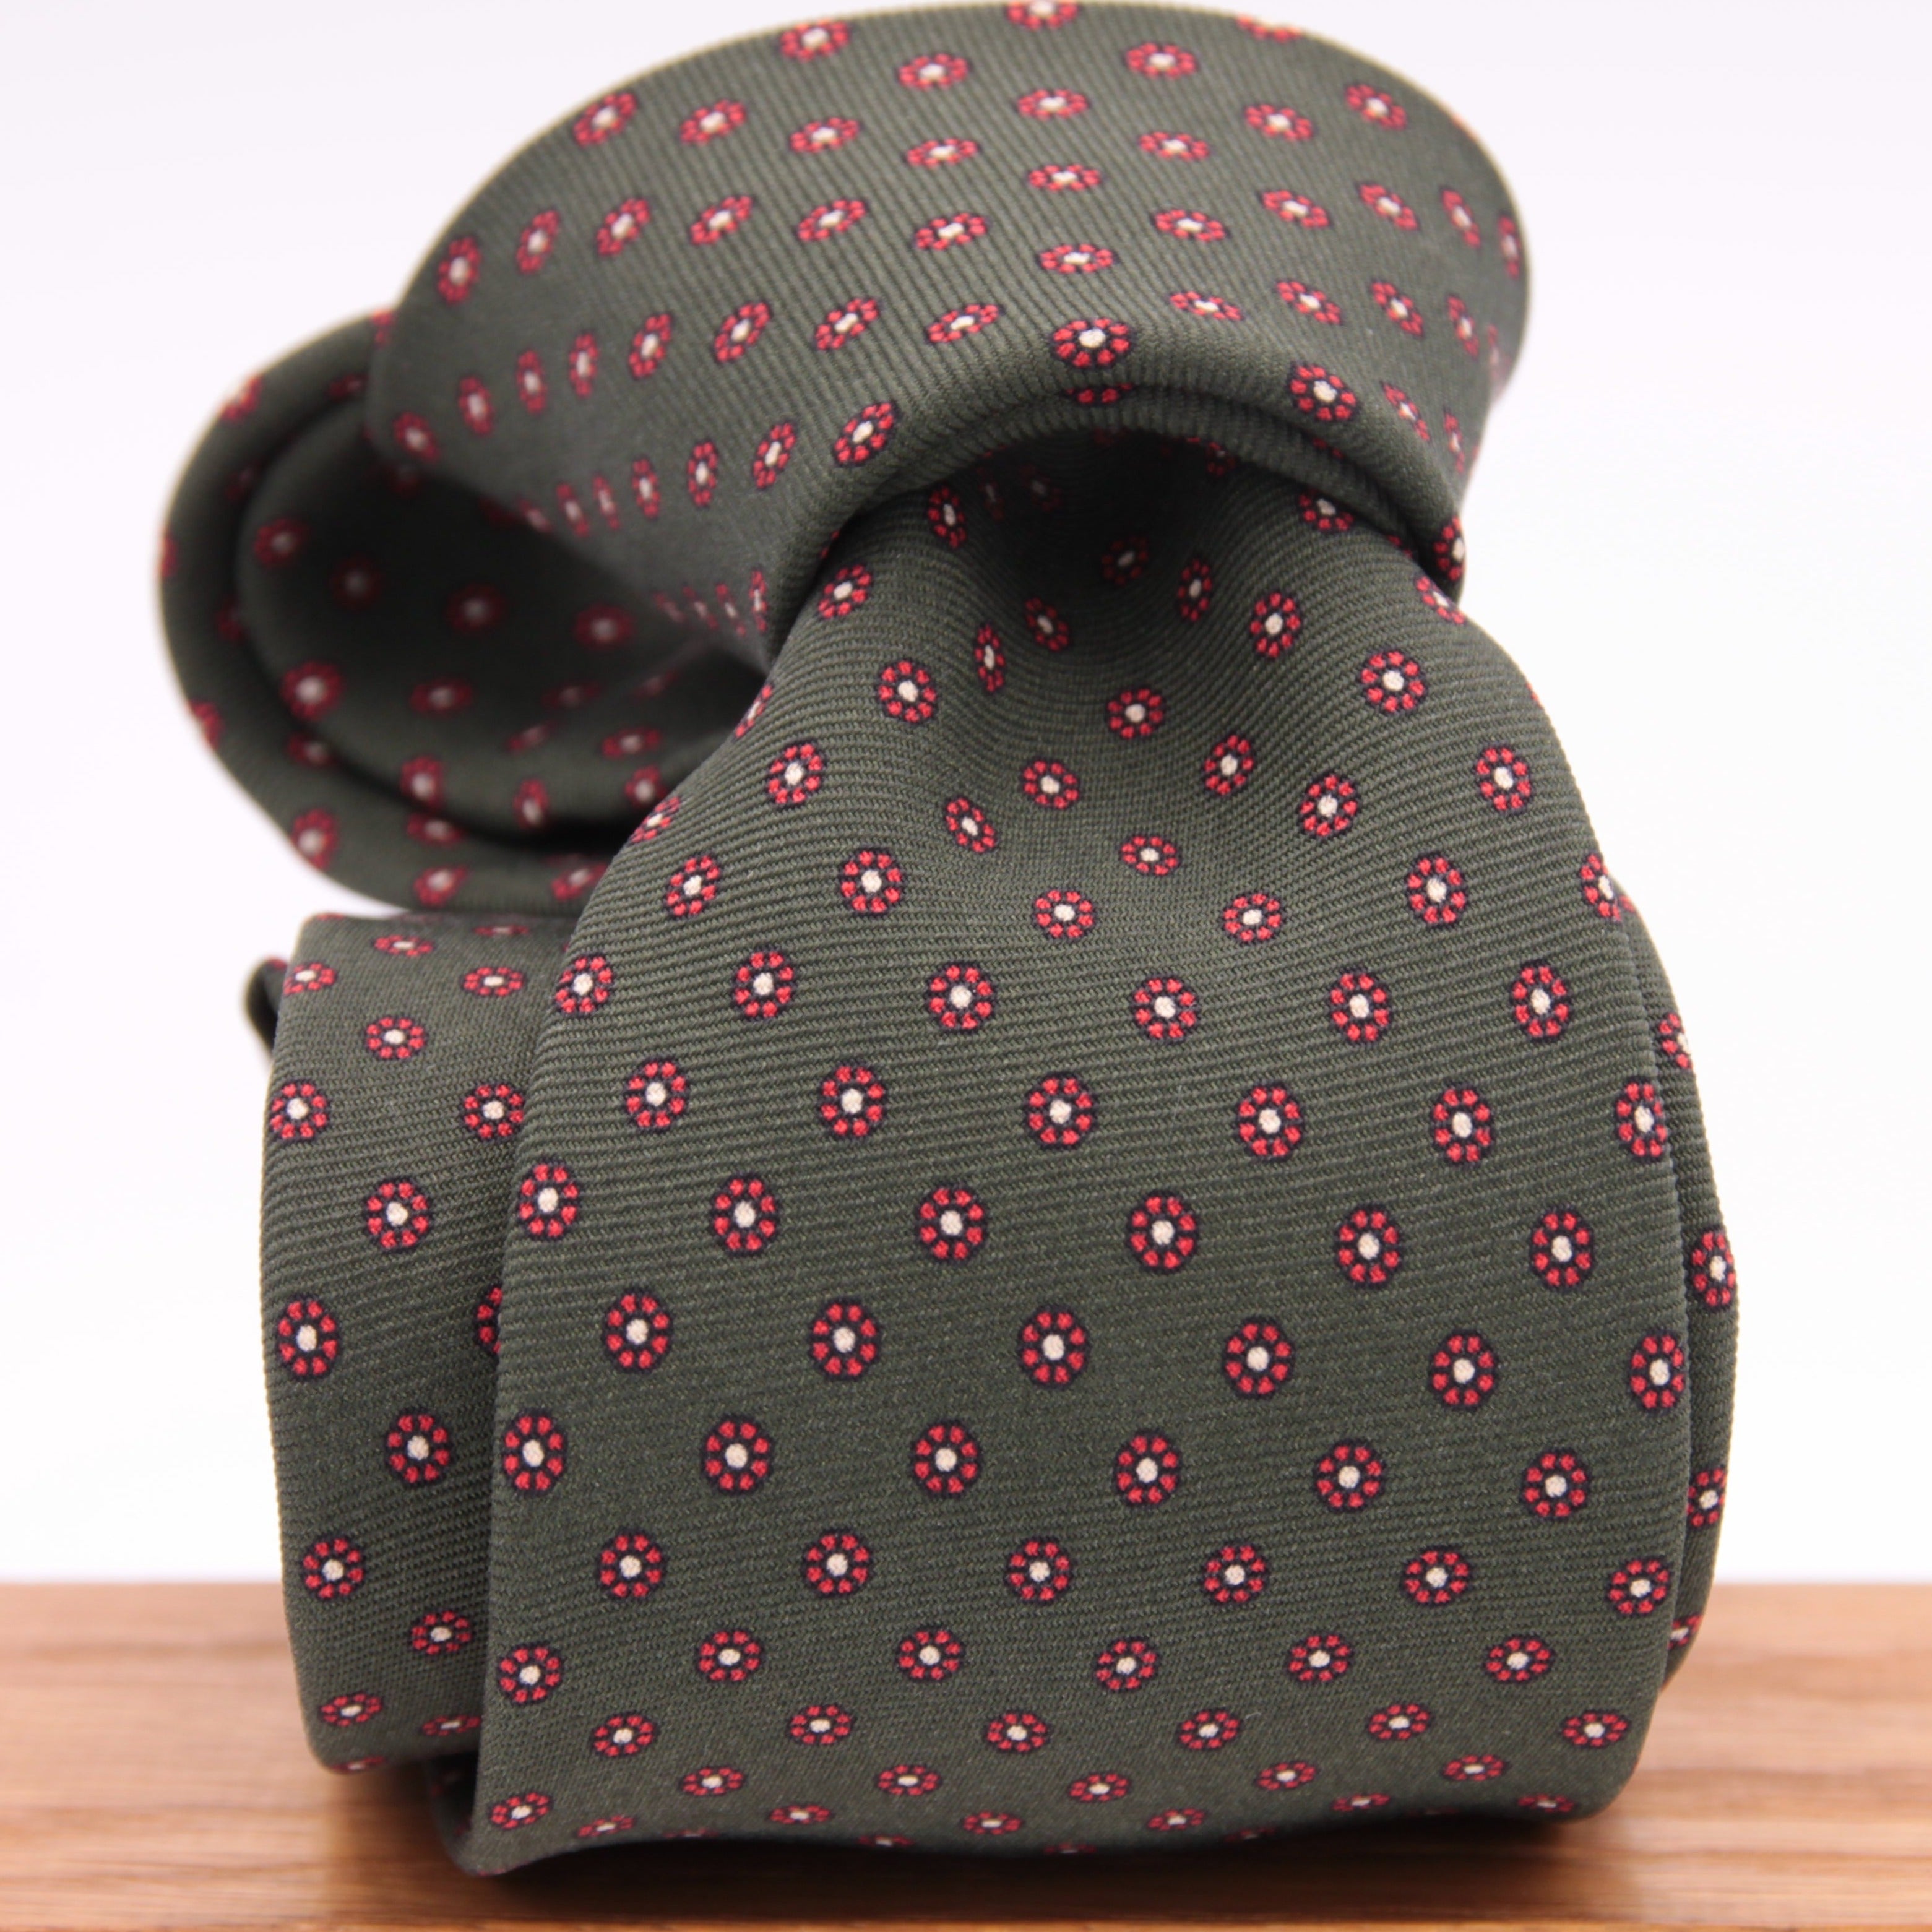 Holliday & Brown for Cruciani & Bella 100% printed Silk Self tipped Green, Red and White motif tie Handmade in Italy 8 cm x 150 cm 5014